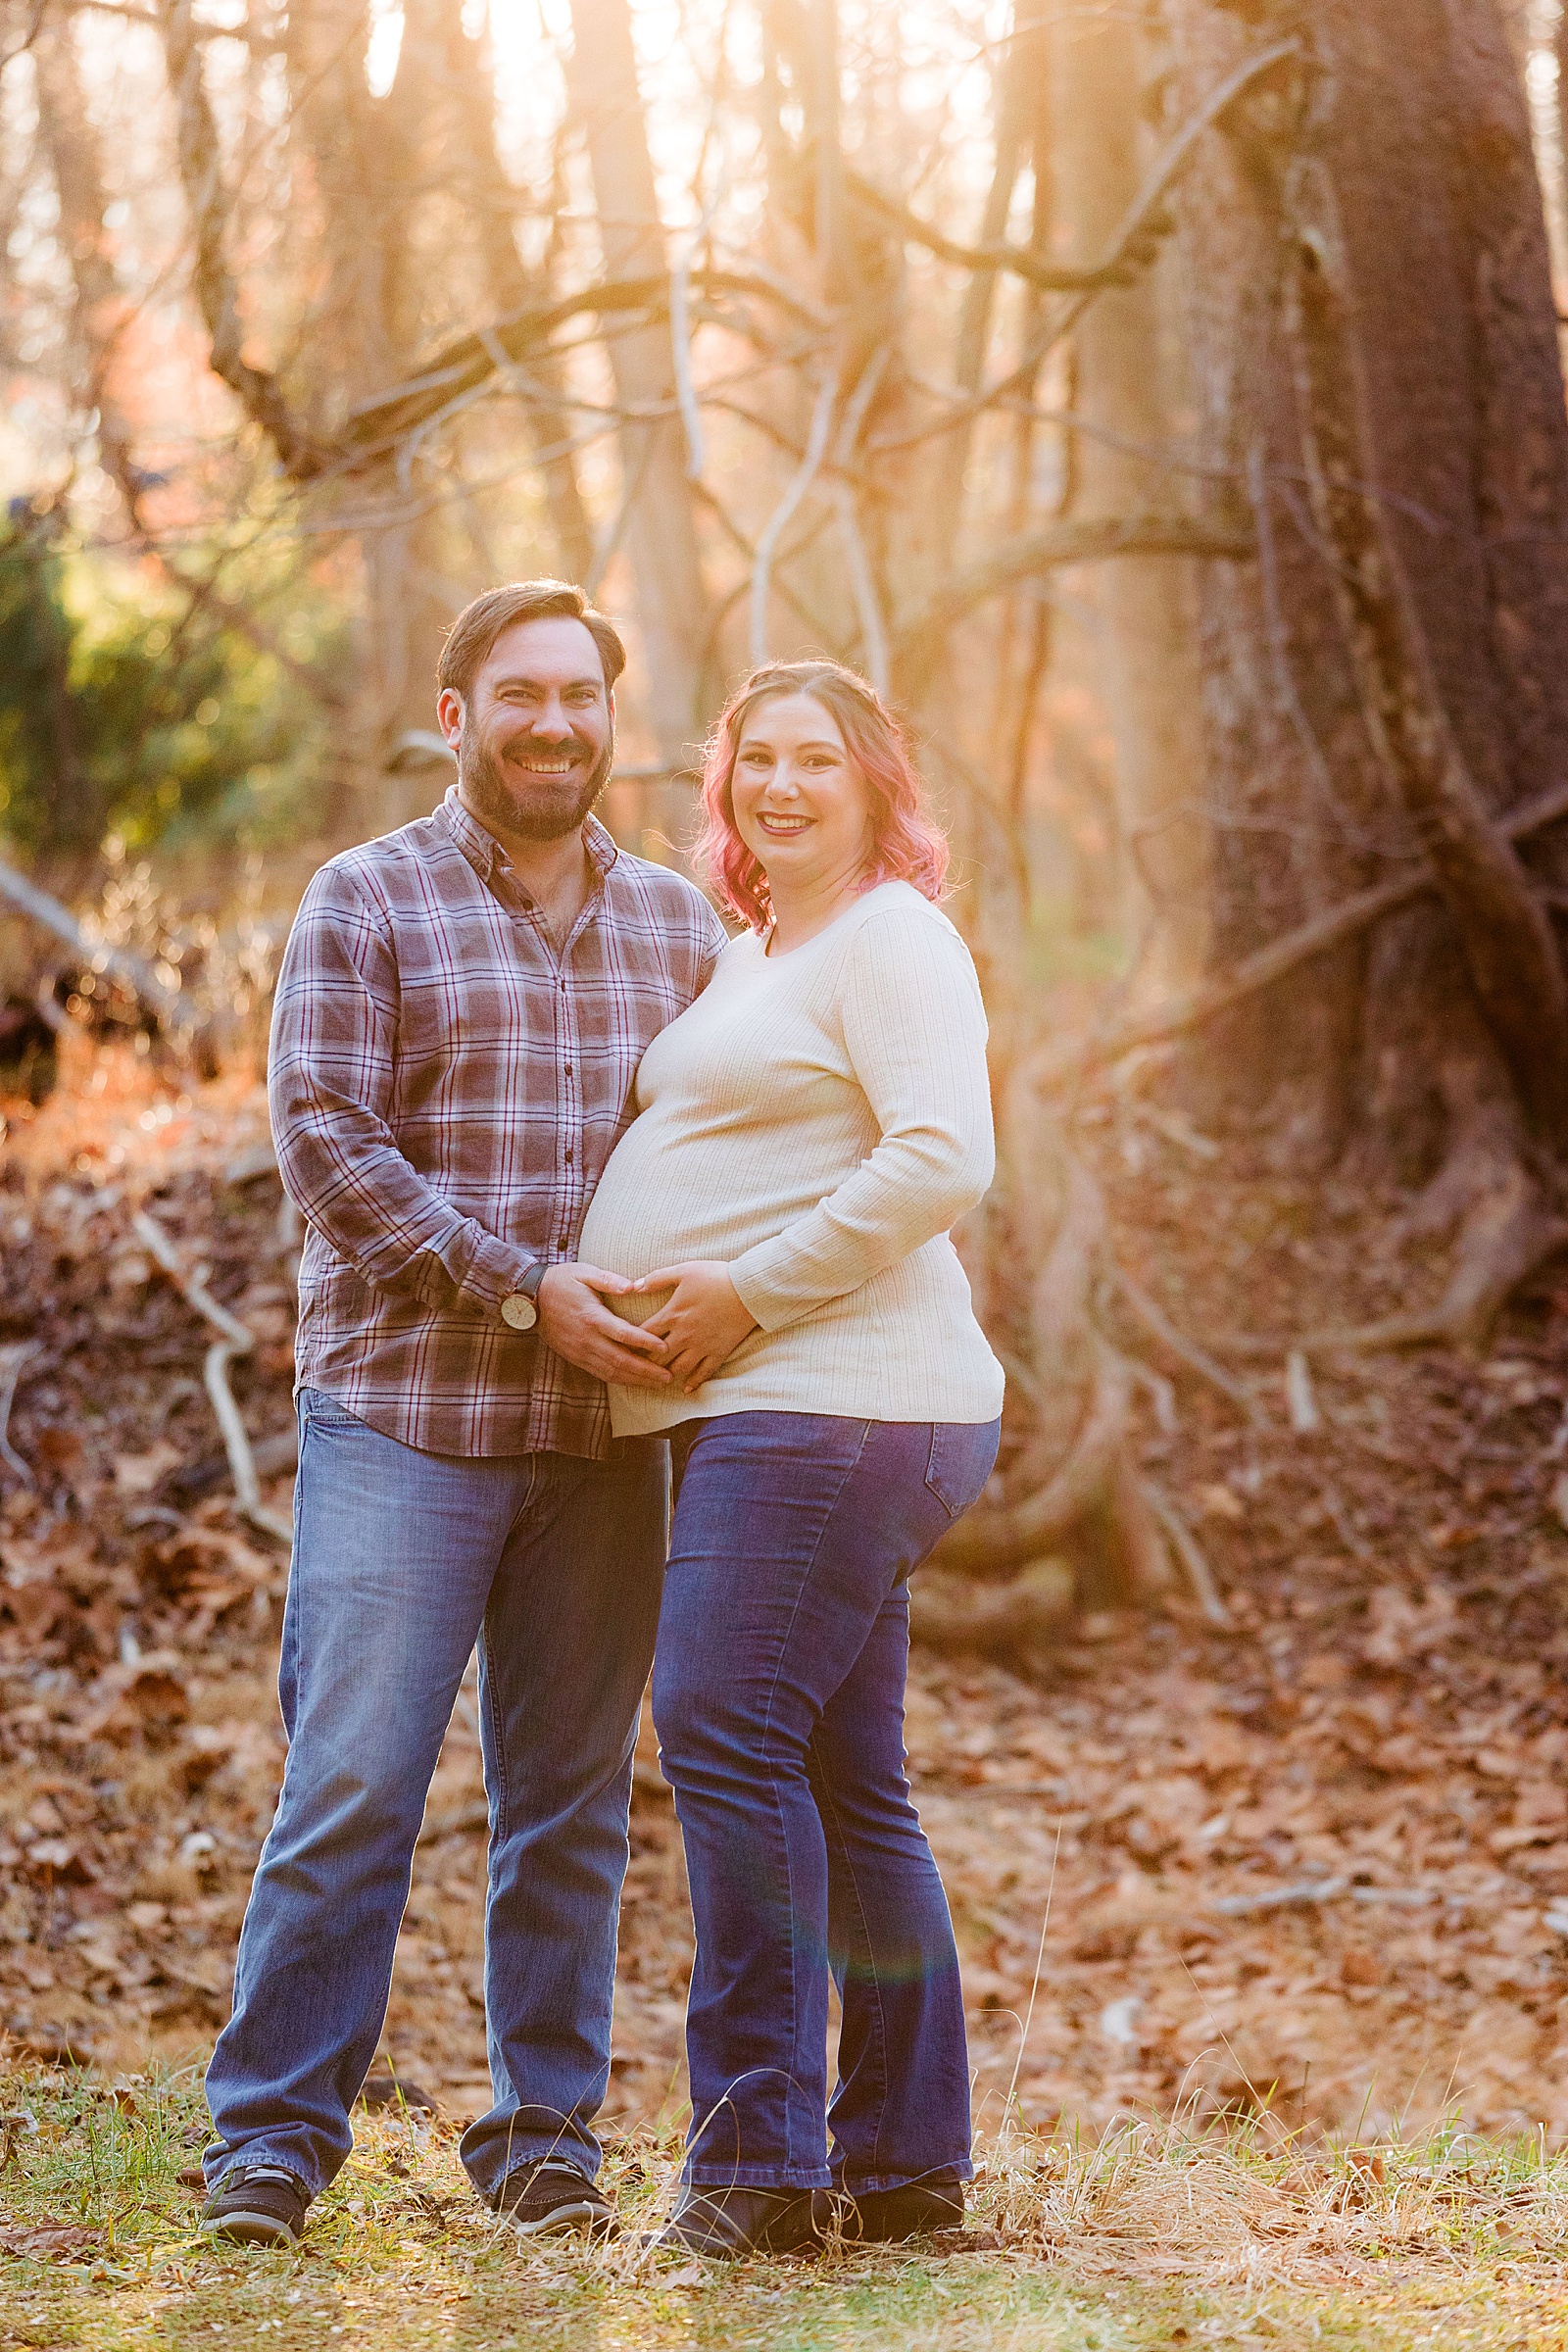 Sun shines through and couple smiles at the photographer while holding pregnant belly.